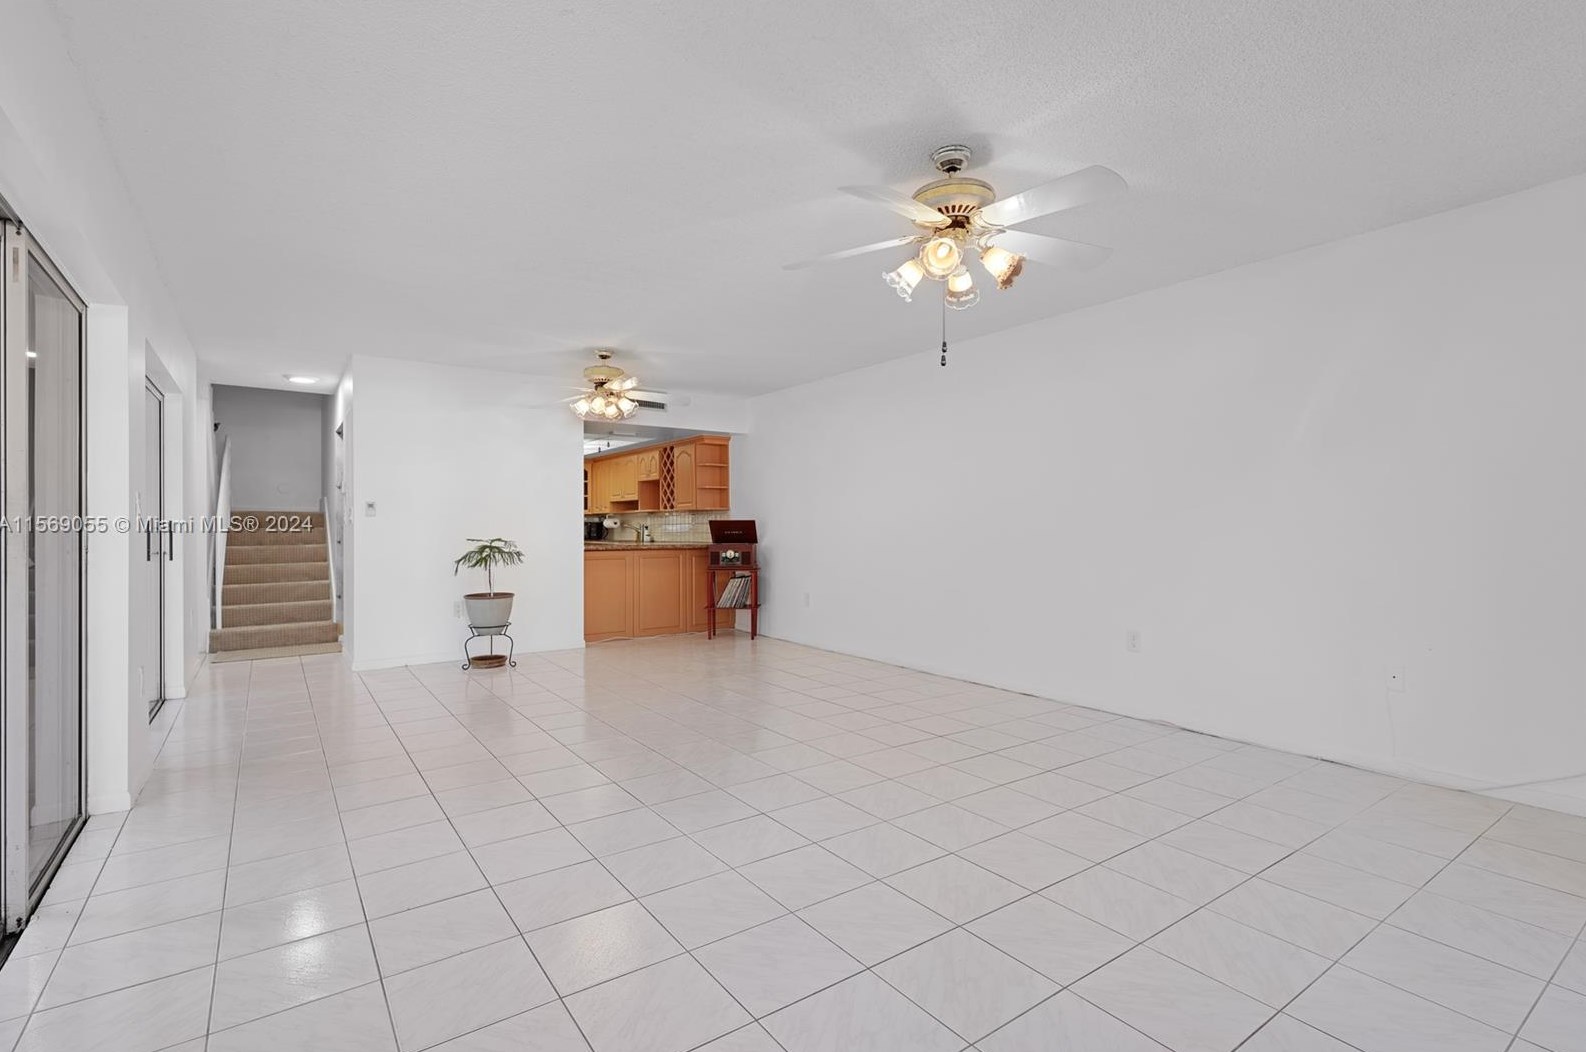 596 Nw 97th Ave, Fort Lauderdale, FL 33324